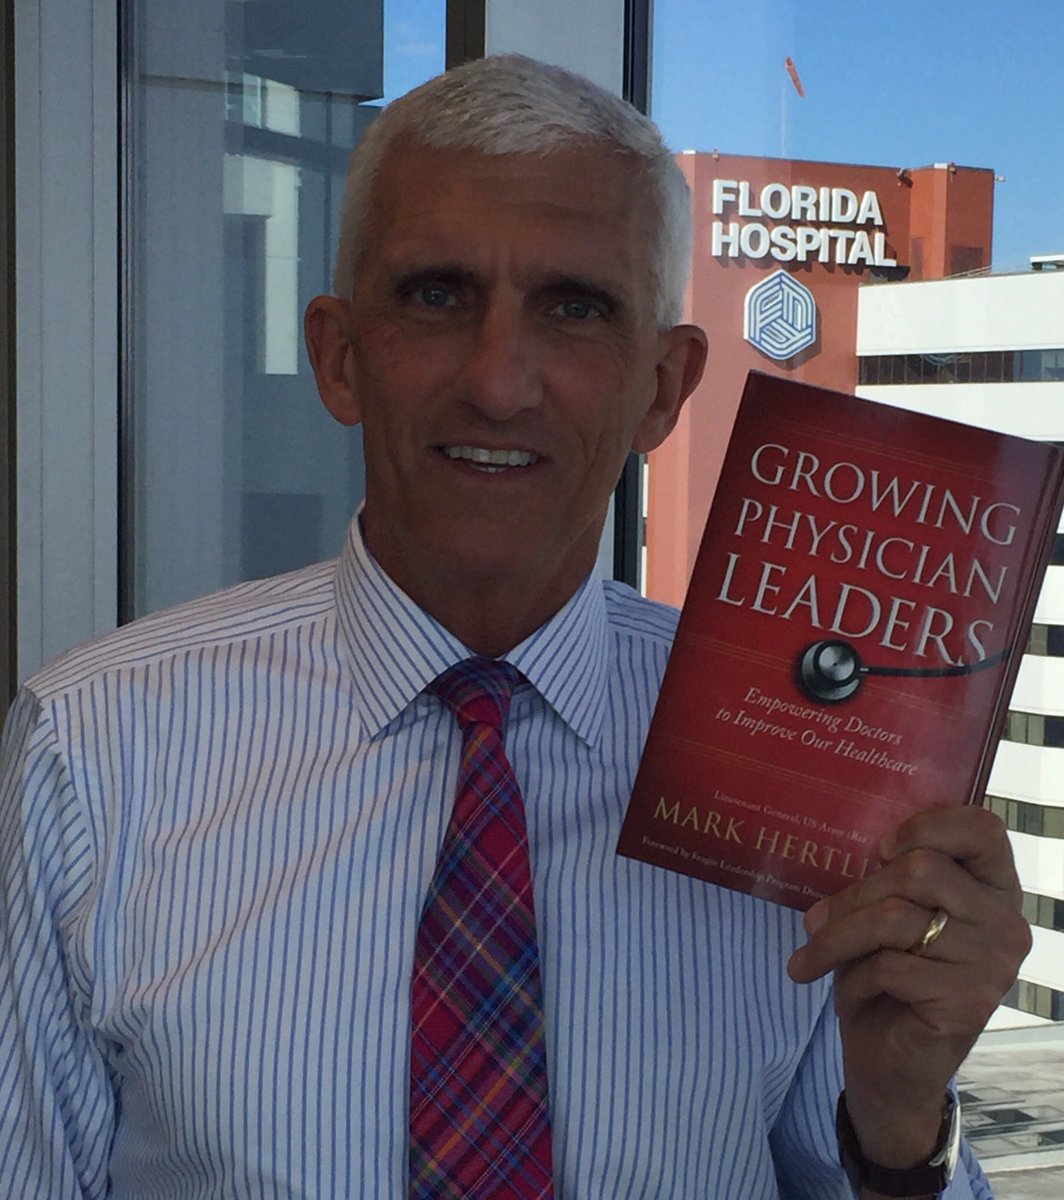 Growing Physician Leaders: Empowering Doctors to Improve Our Healthcare 1st Edition